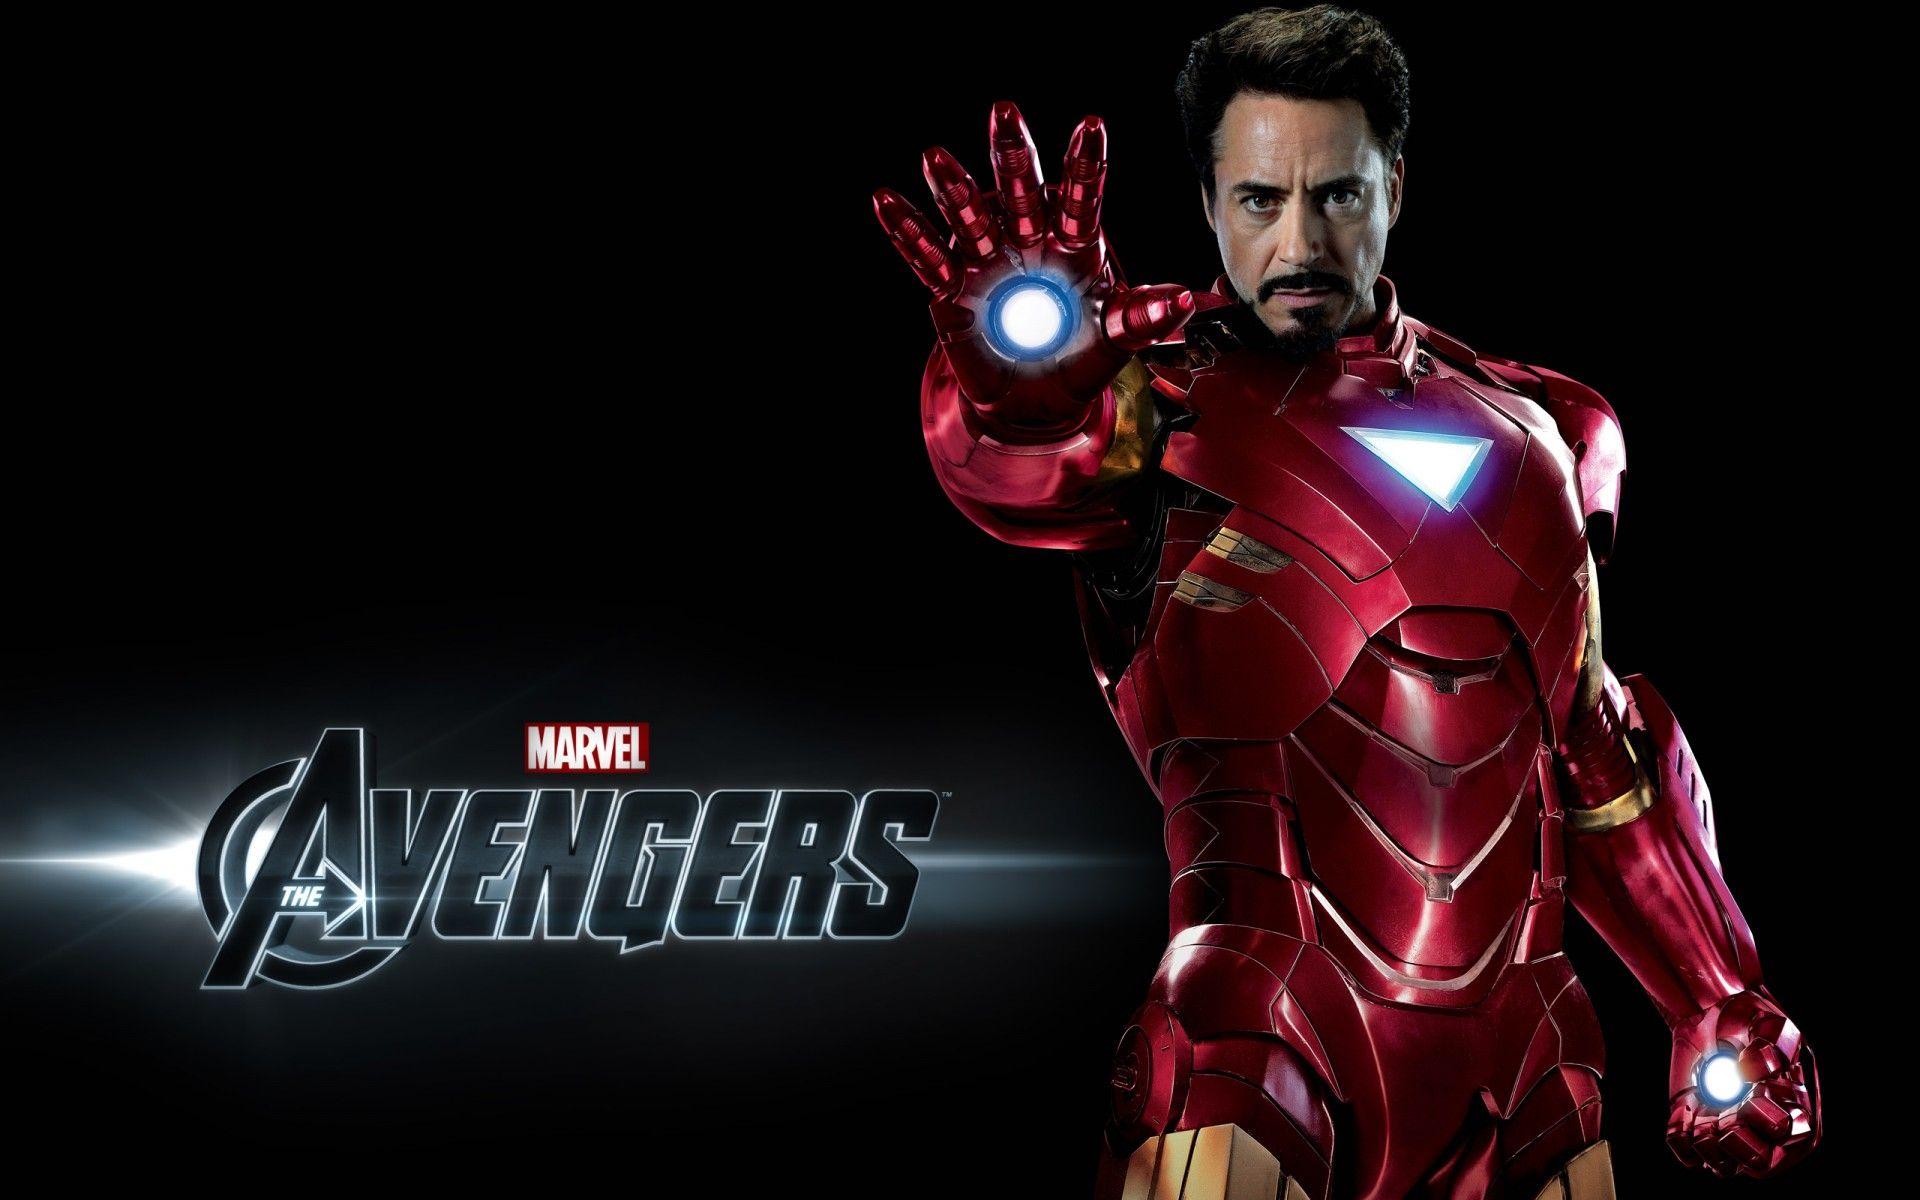 The Avengers 2 Iron Man PC Free Download. Projects to